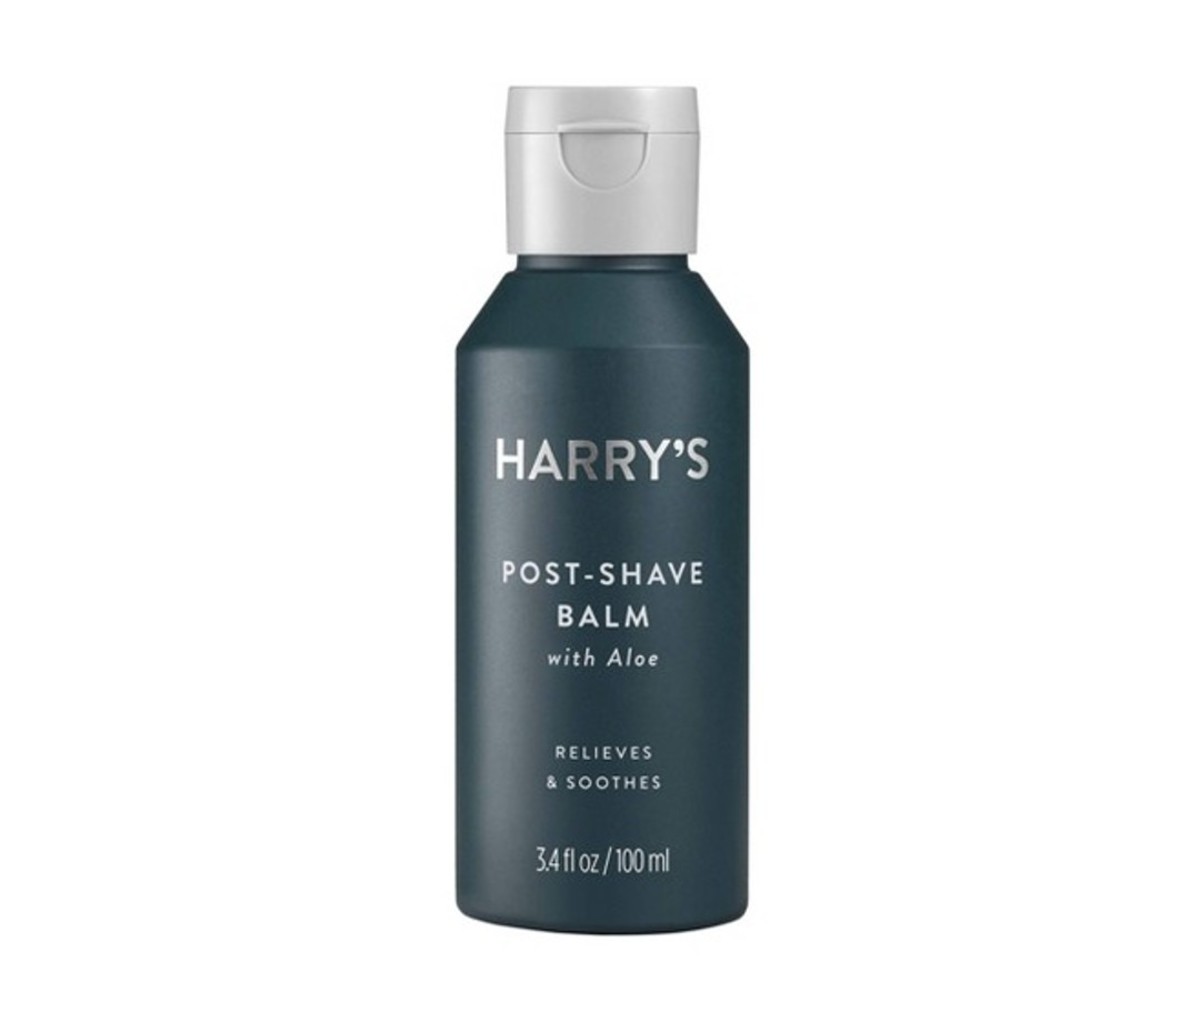 Harry’s Post-Shave Balm With Aloe